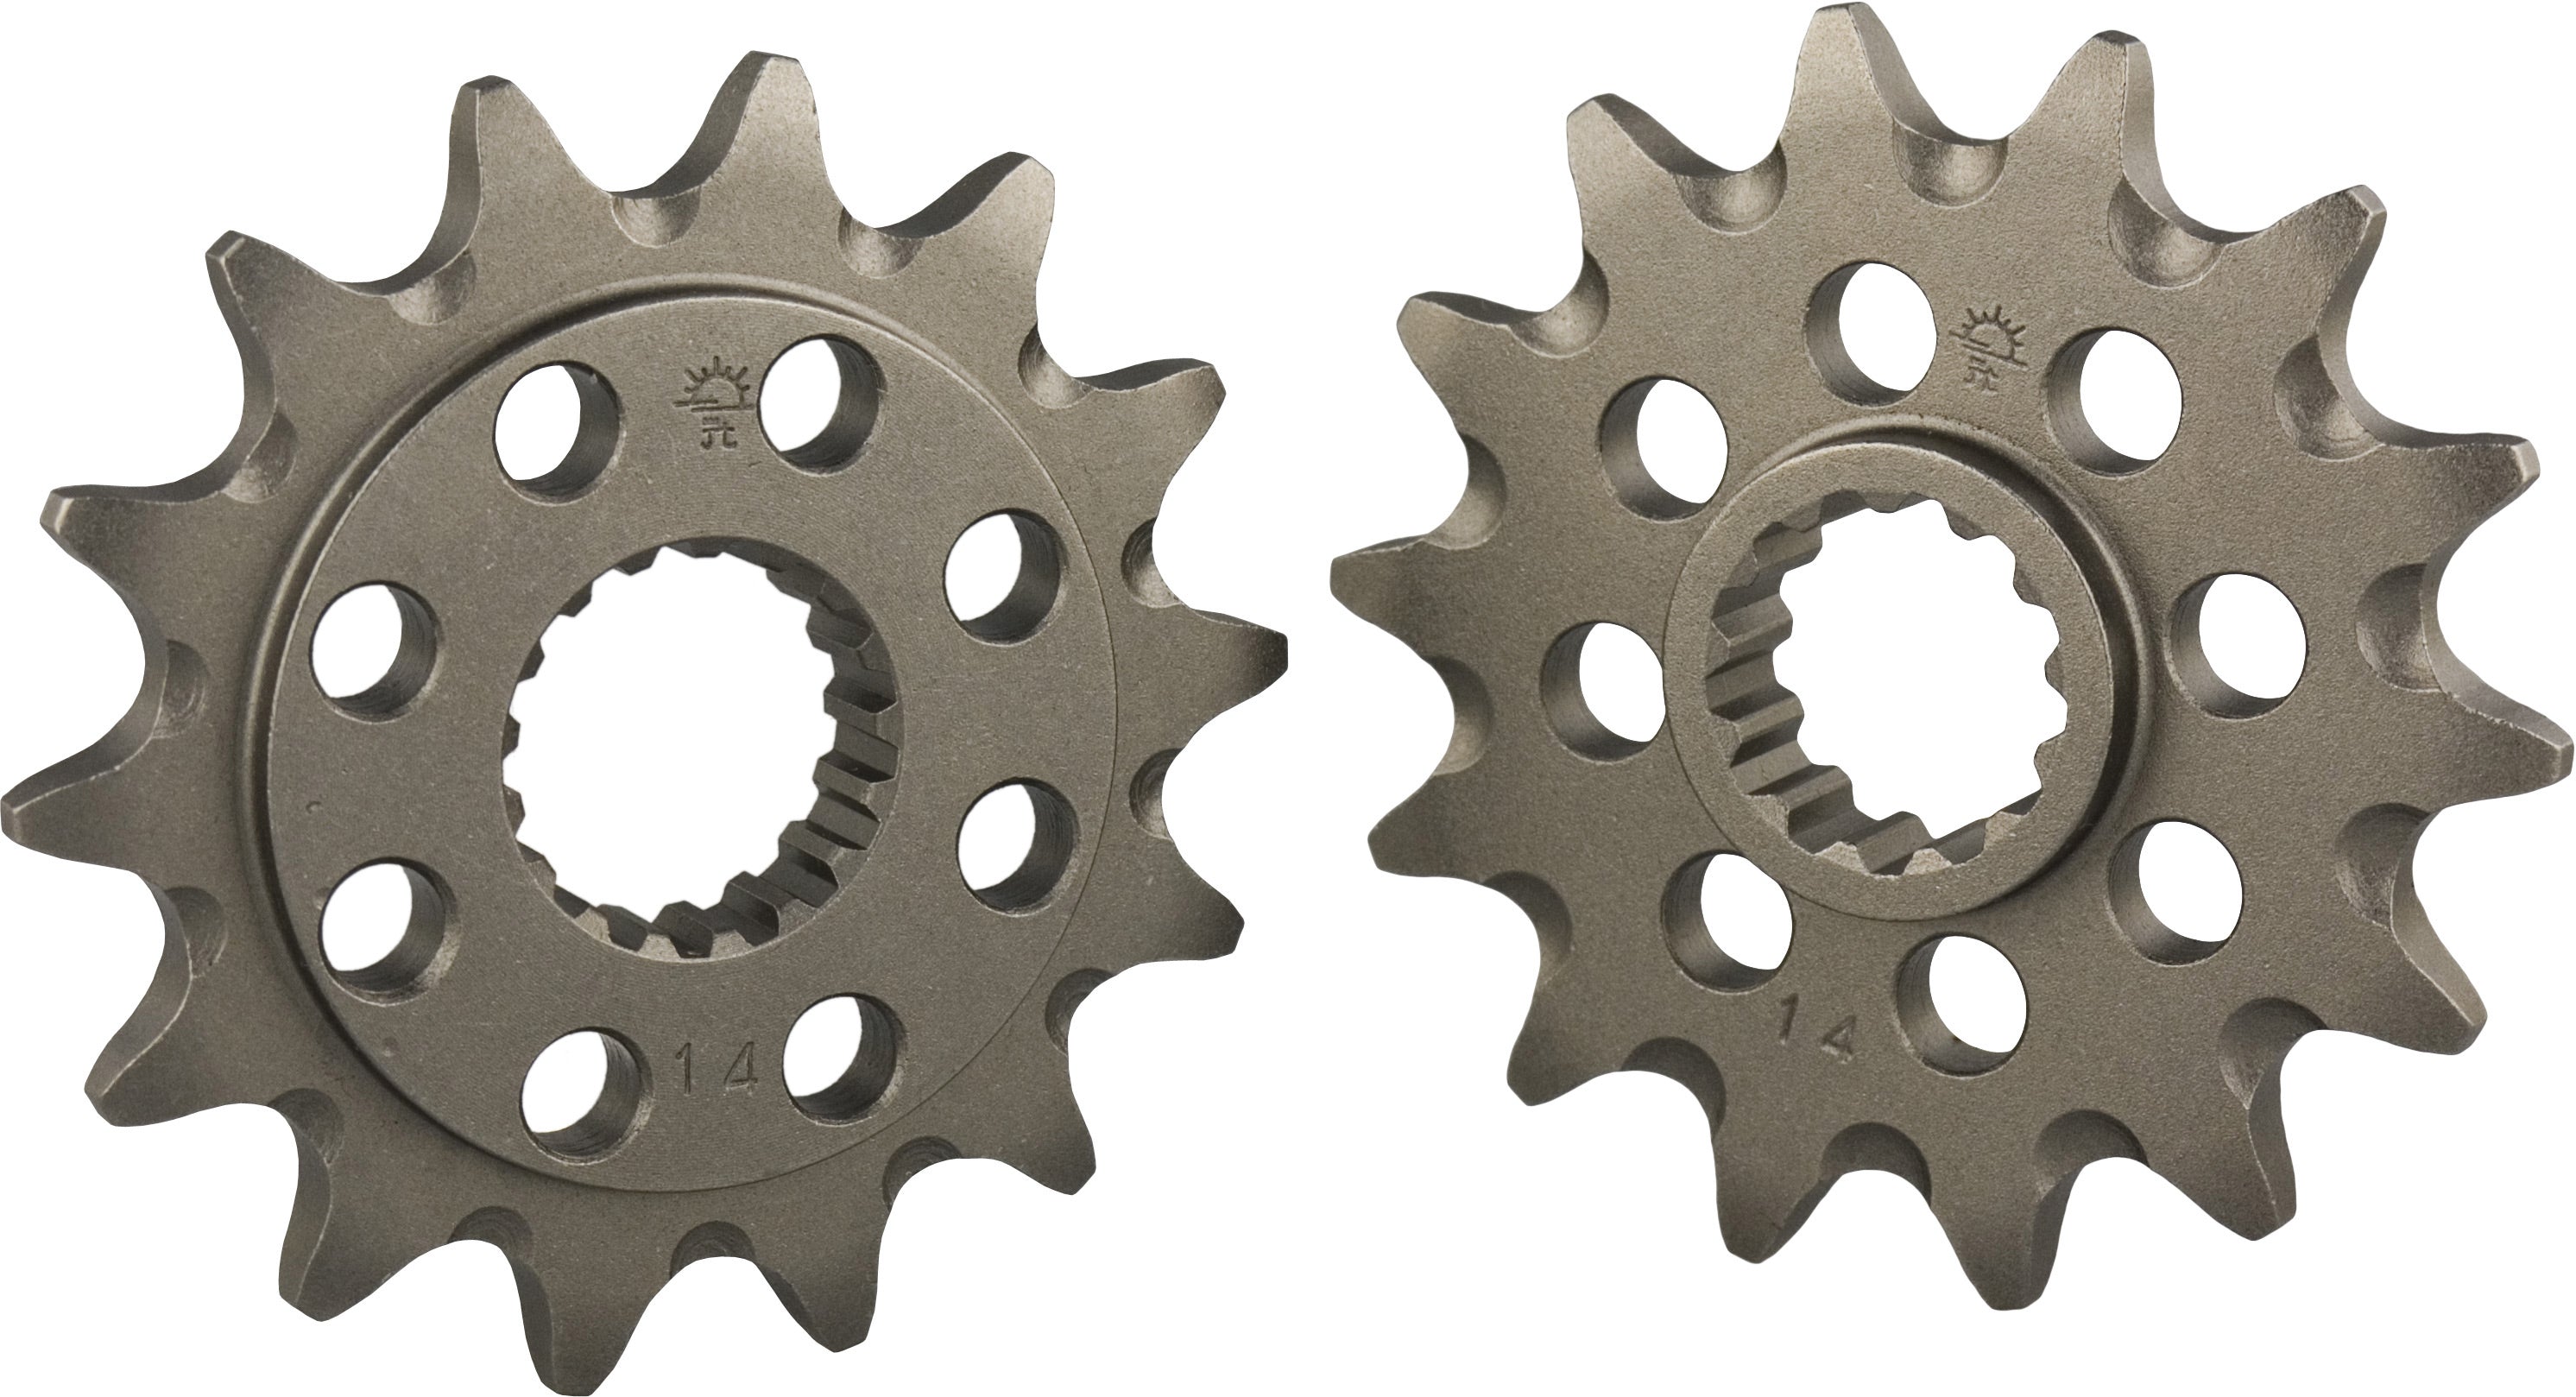 Front Sprocket 13T for Beta, KTM, HQV, and Husqvarna Motorcycles - Close-up View